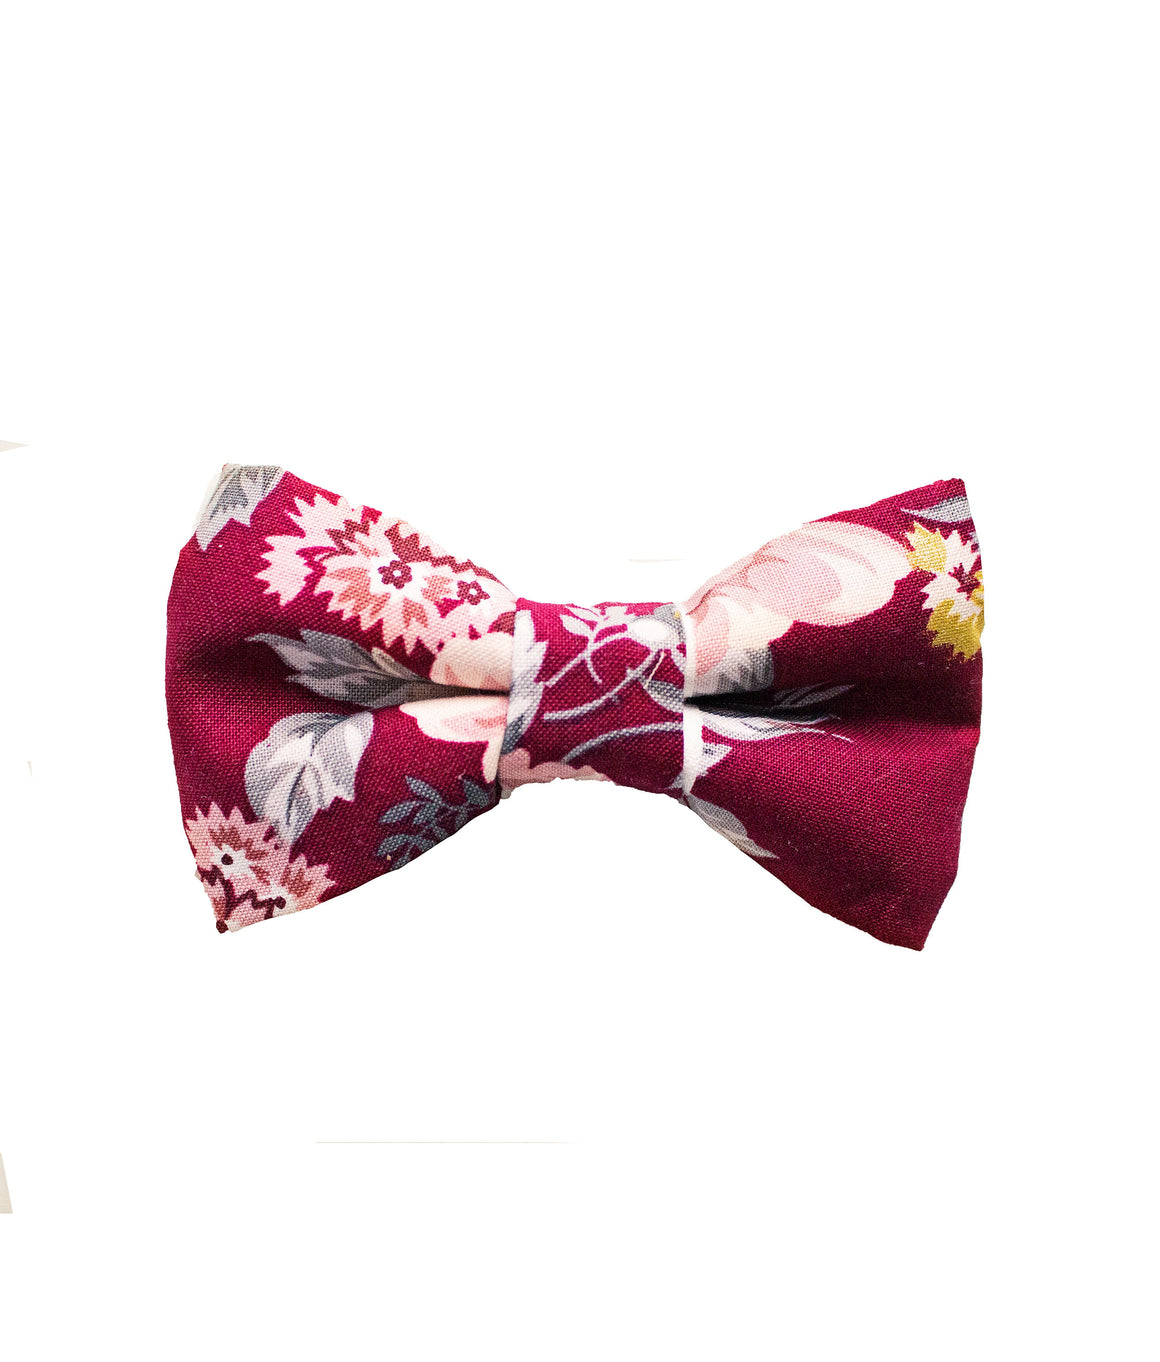 Burgundy Floral Bow Tie - Newborn To Adult Sizes